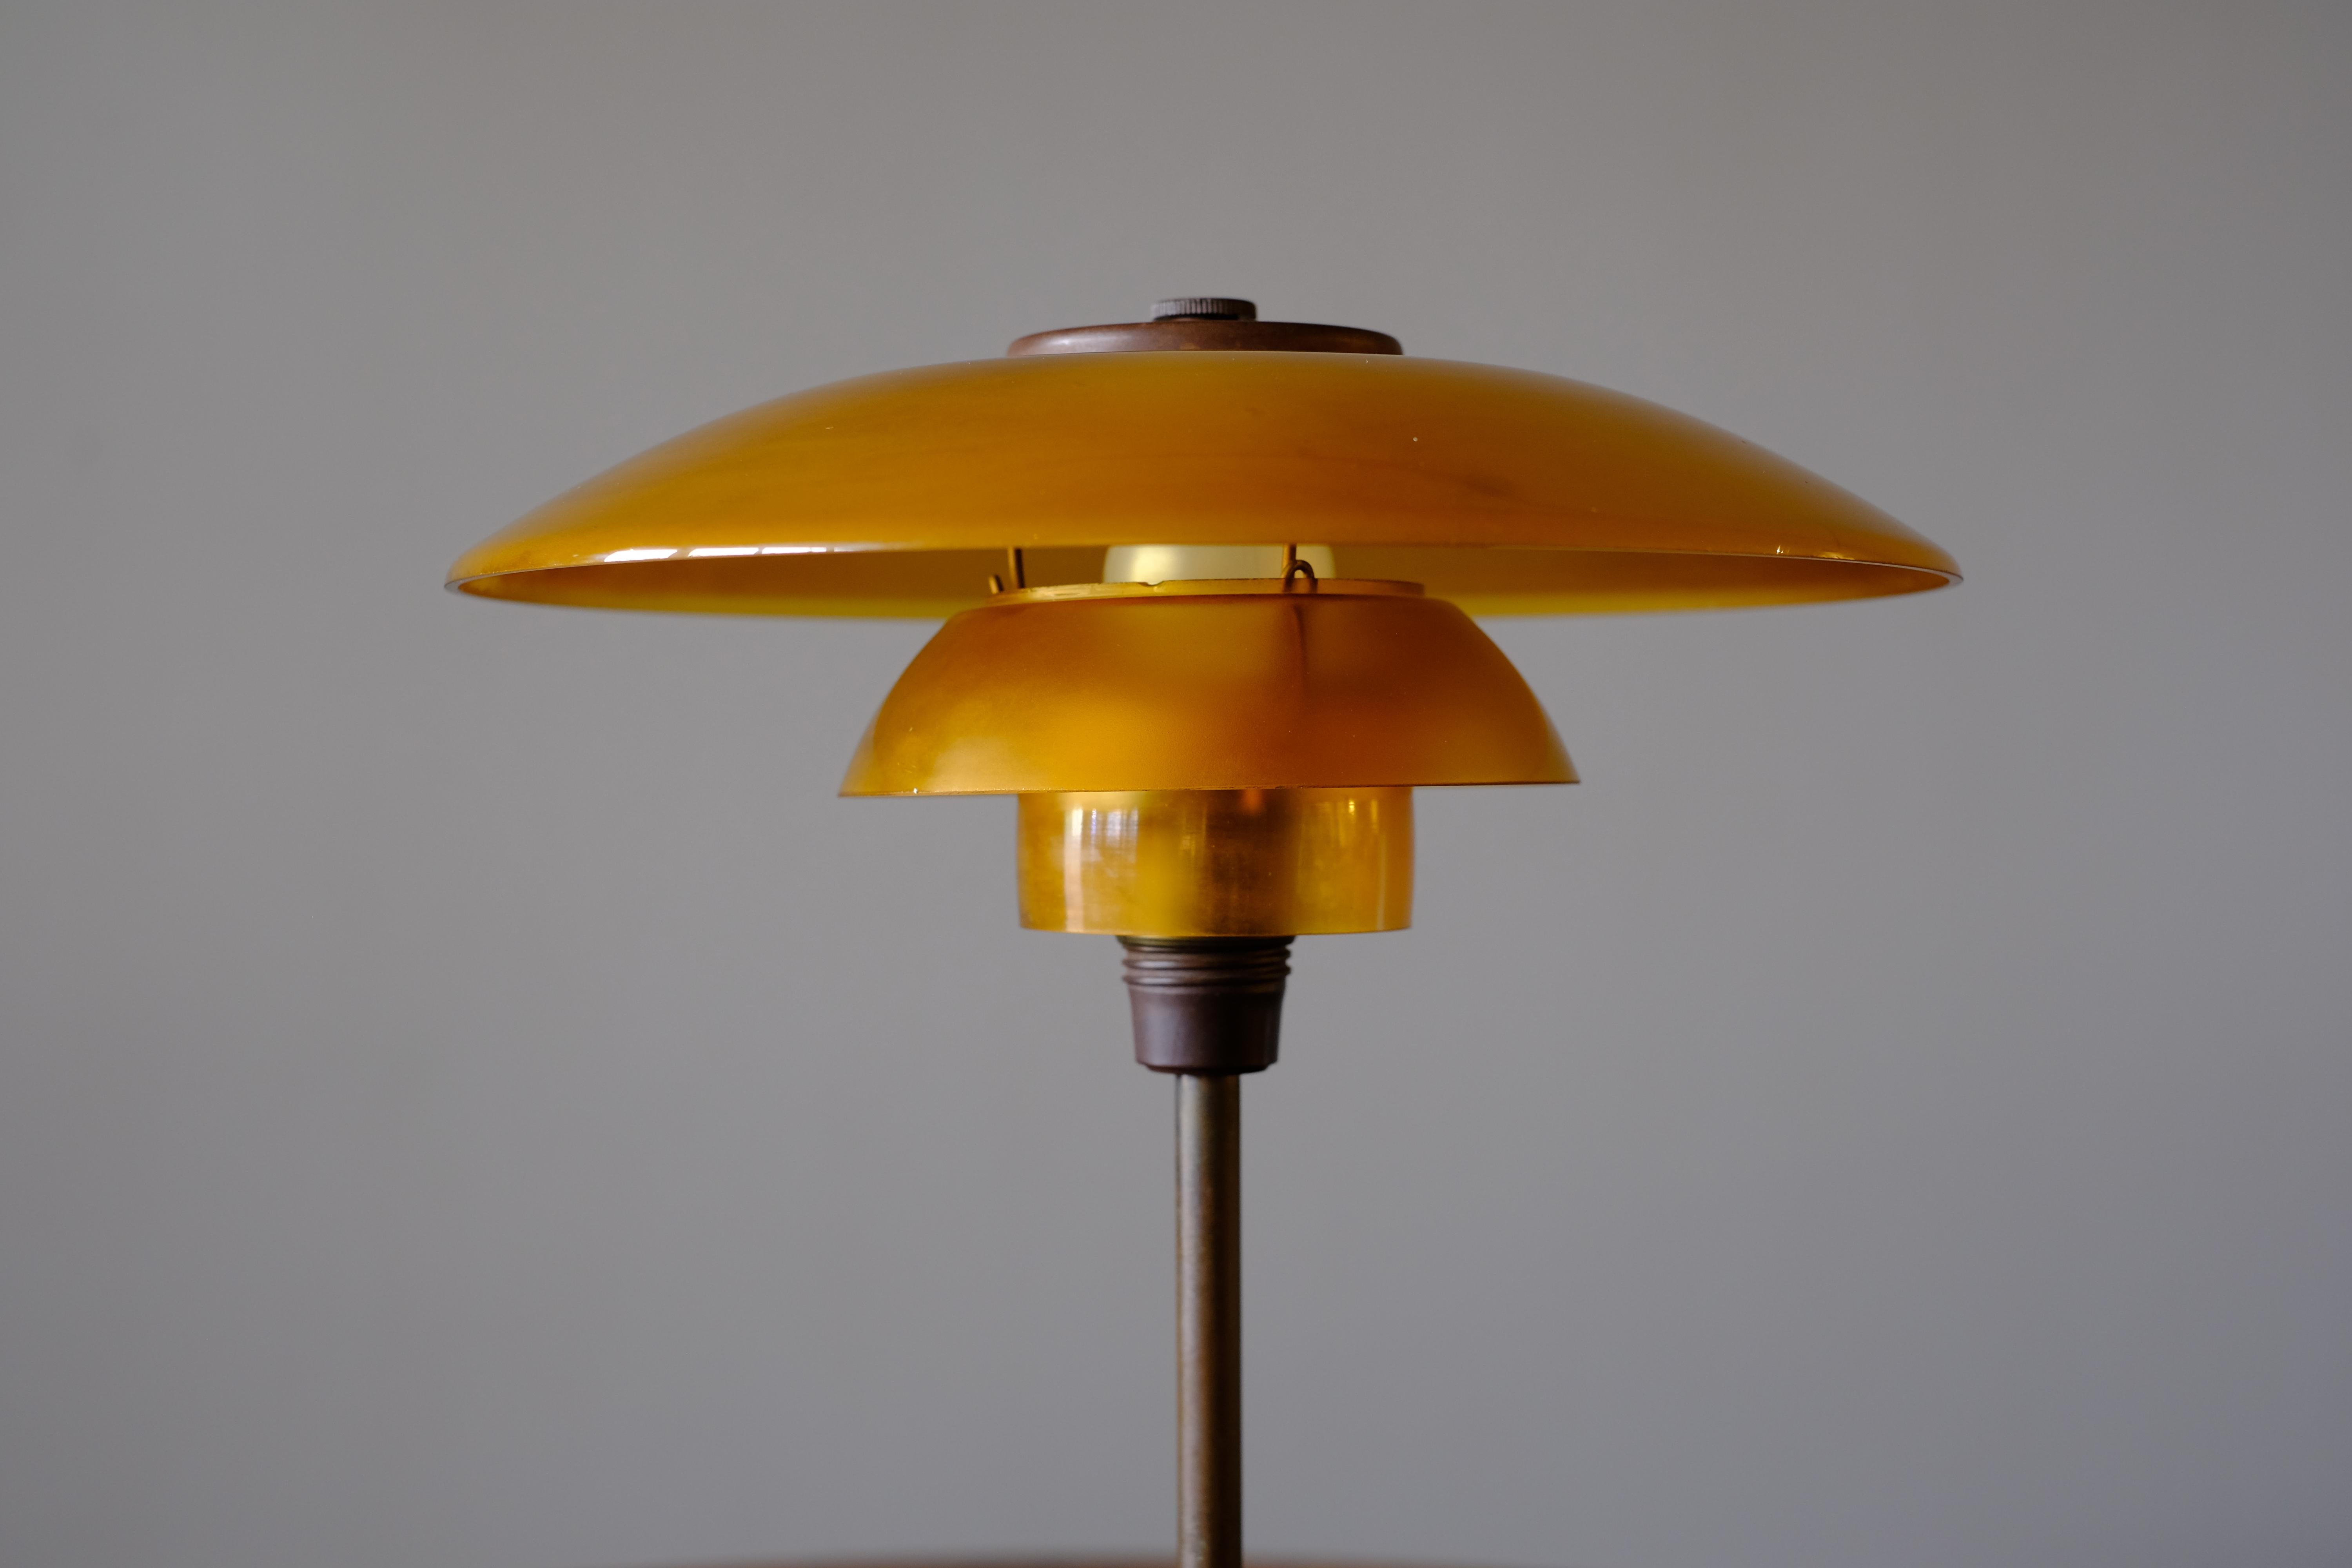 Beautiful early “PH3.5/2” table lamp by Poul Henningsen. It has a browned brass stem and a bakelite contact box with through switch. The shades are in lovely amber coloured glass. It was manufactured in the 1930s by Louis Poulson. As the typical